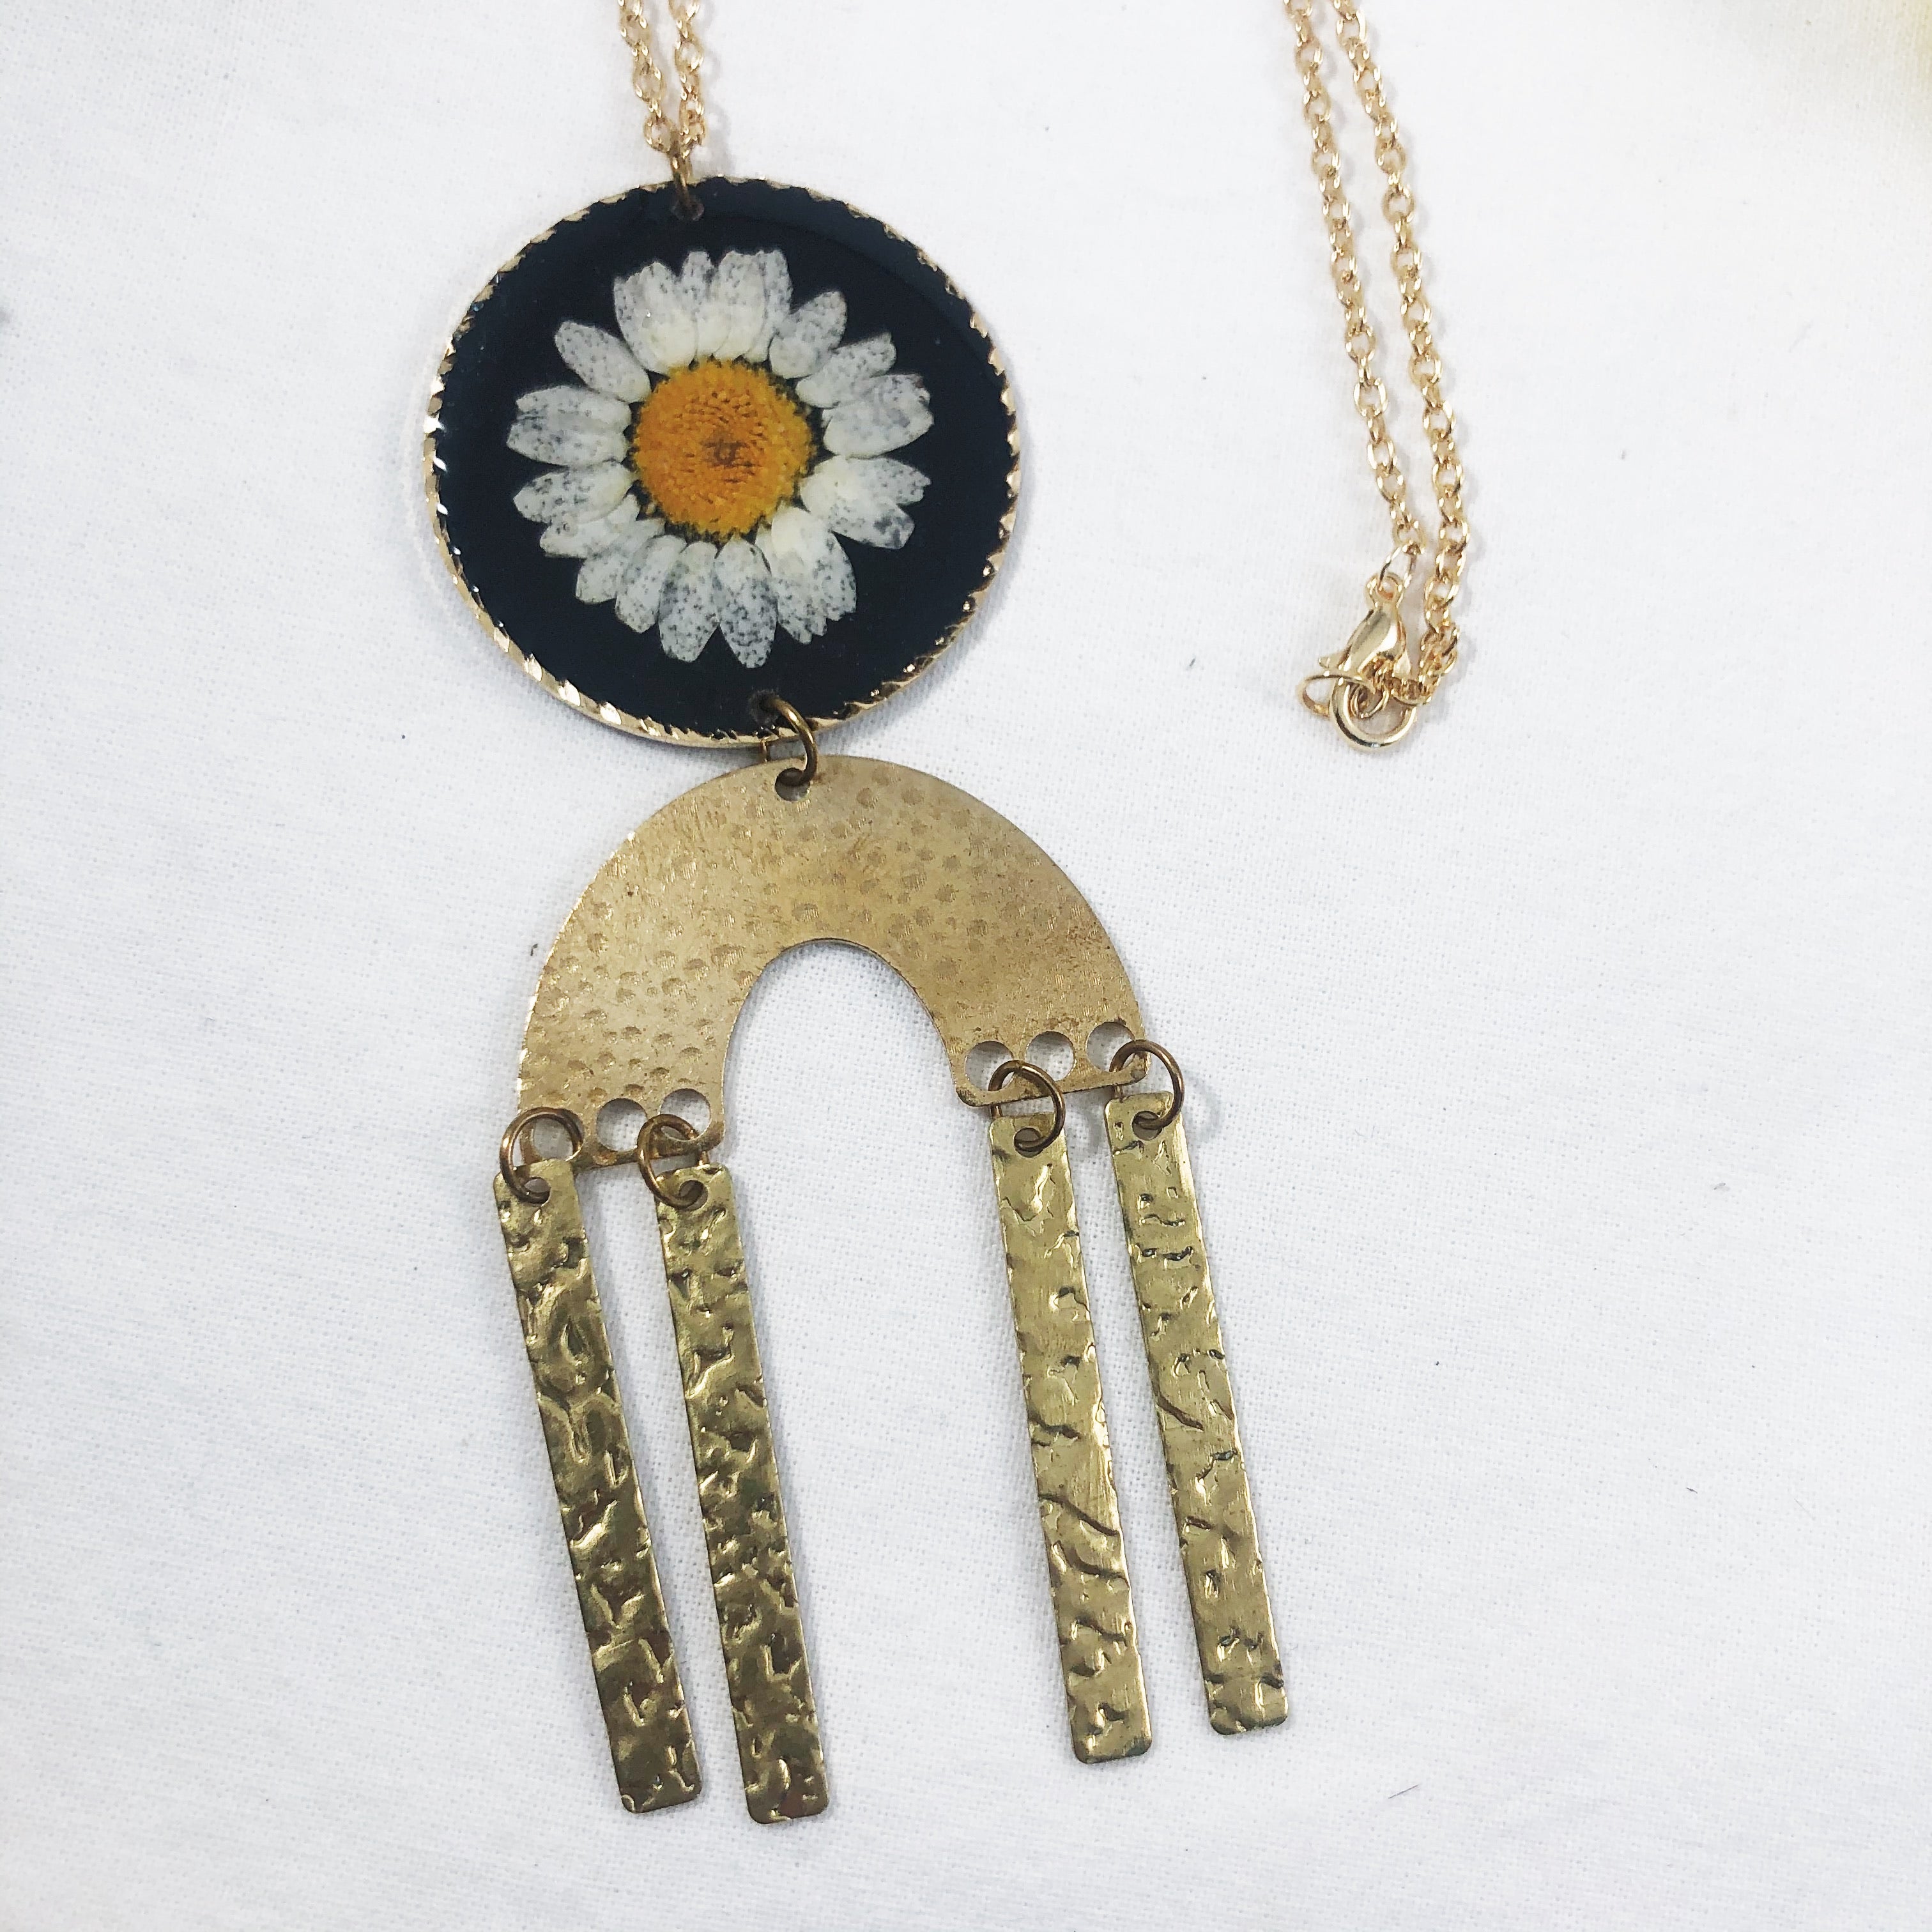 Large Brass Midnight Daisy Necklace with Dangles